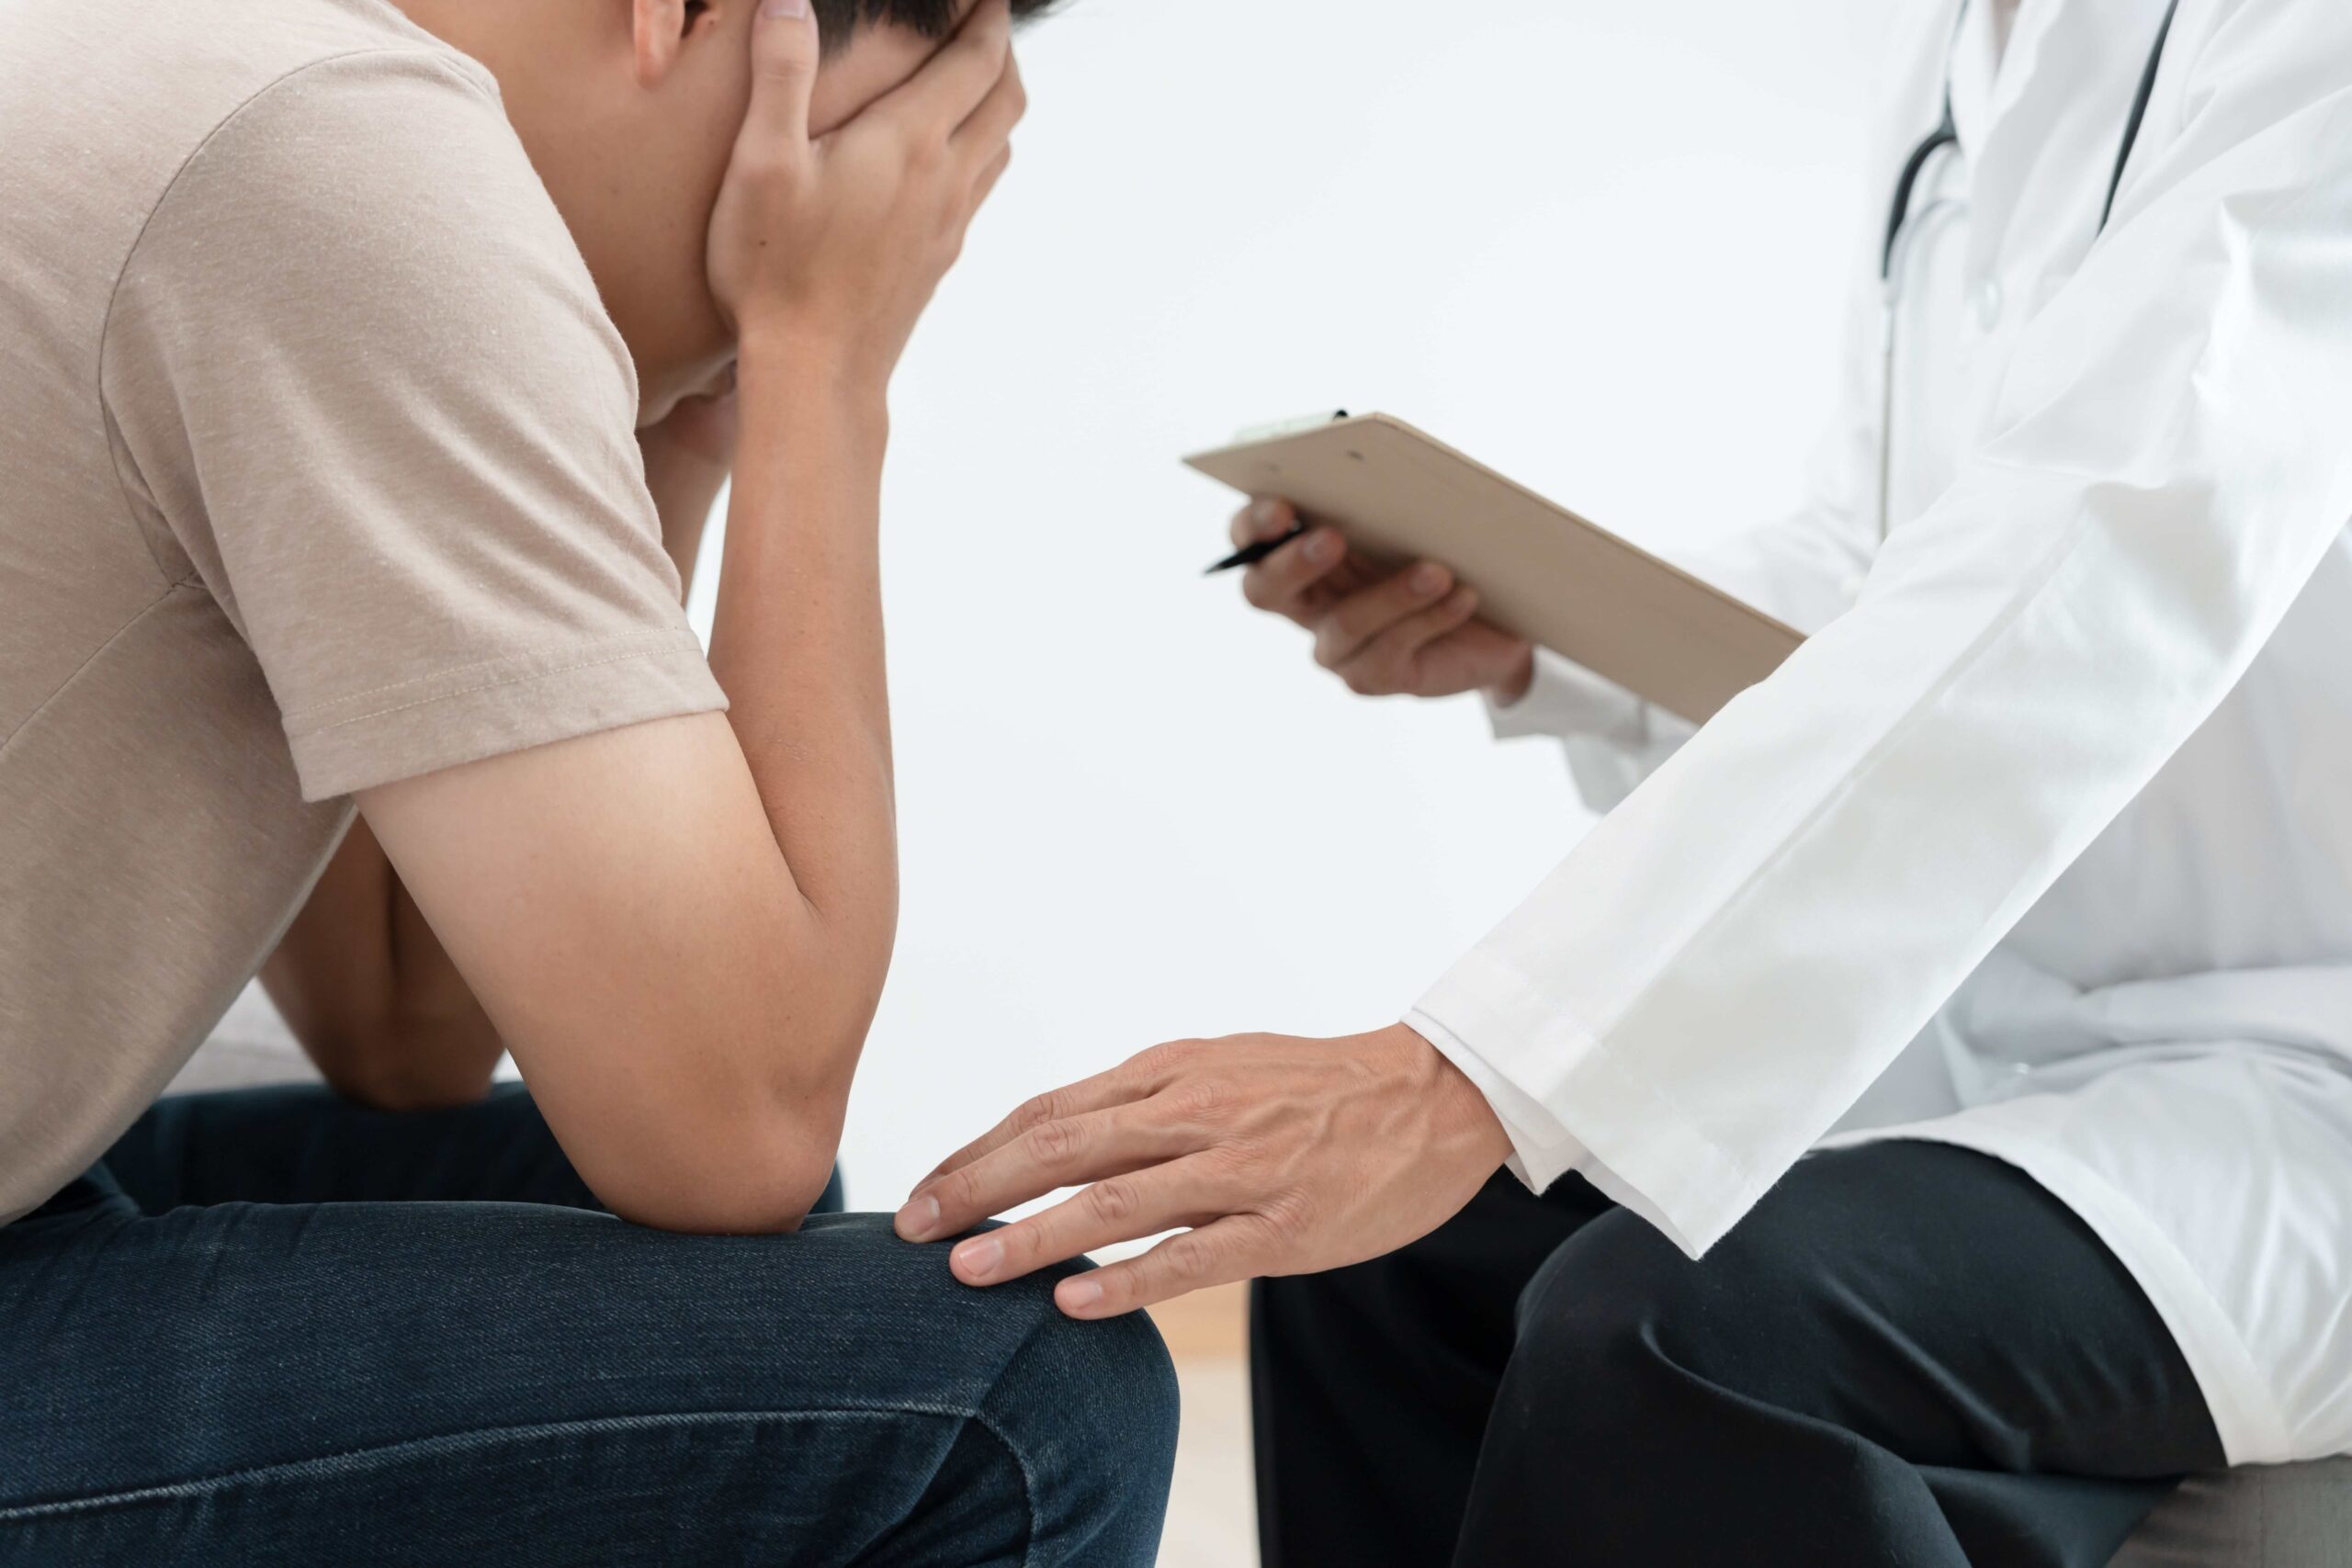 depressed patient with bipolar disorder speaking with a doctor